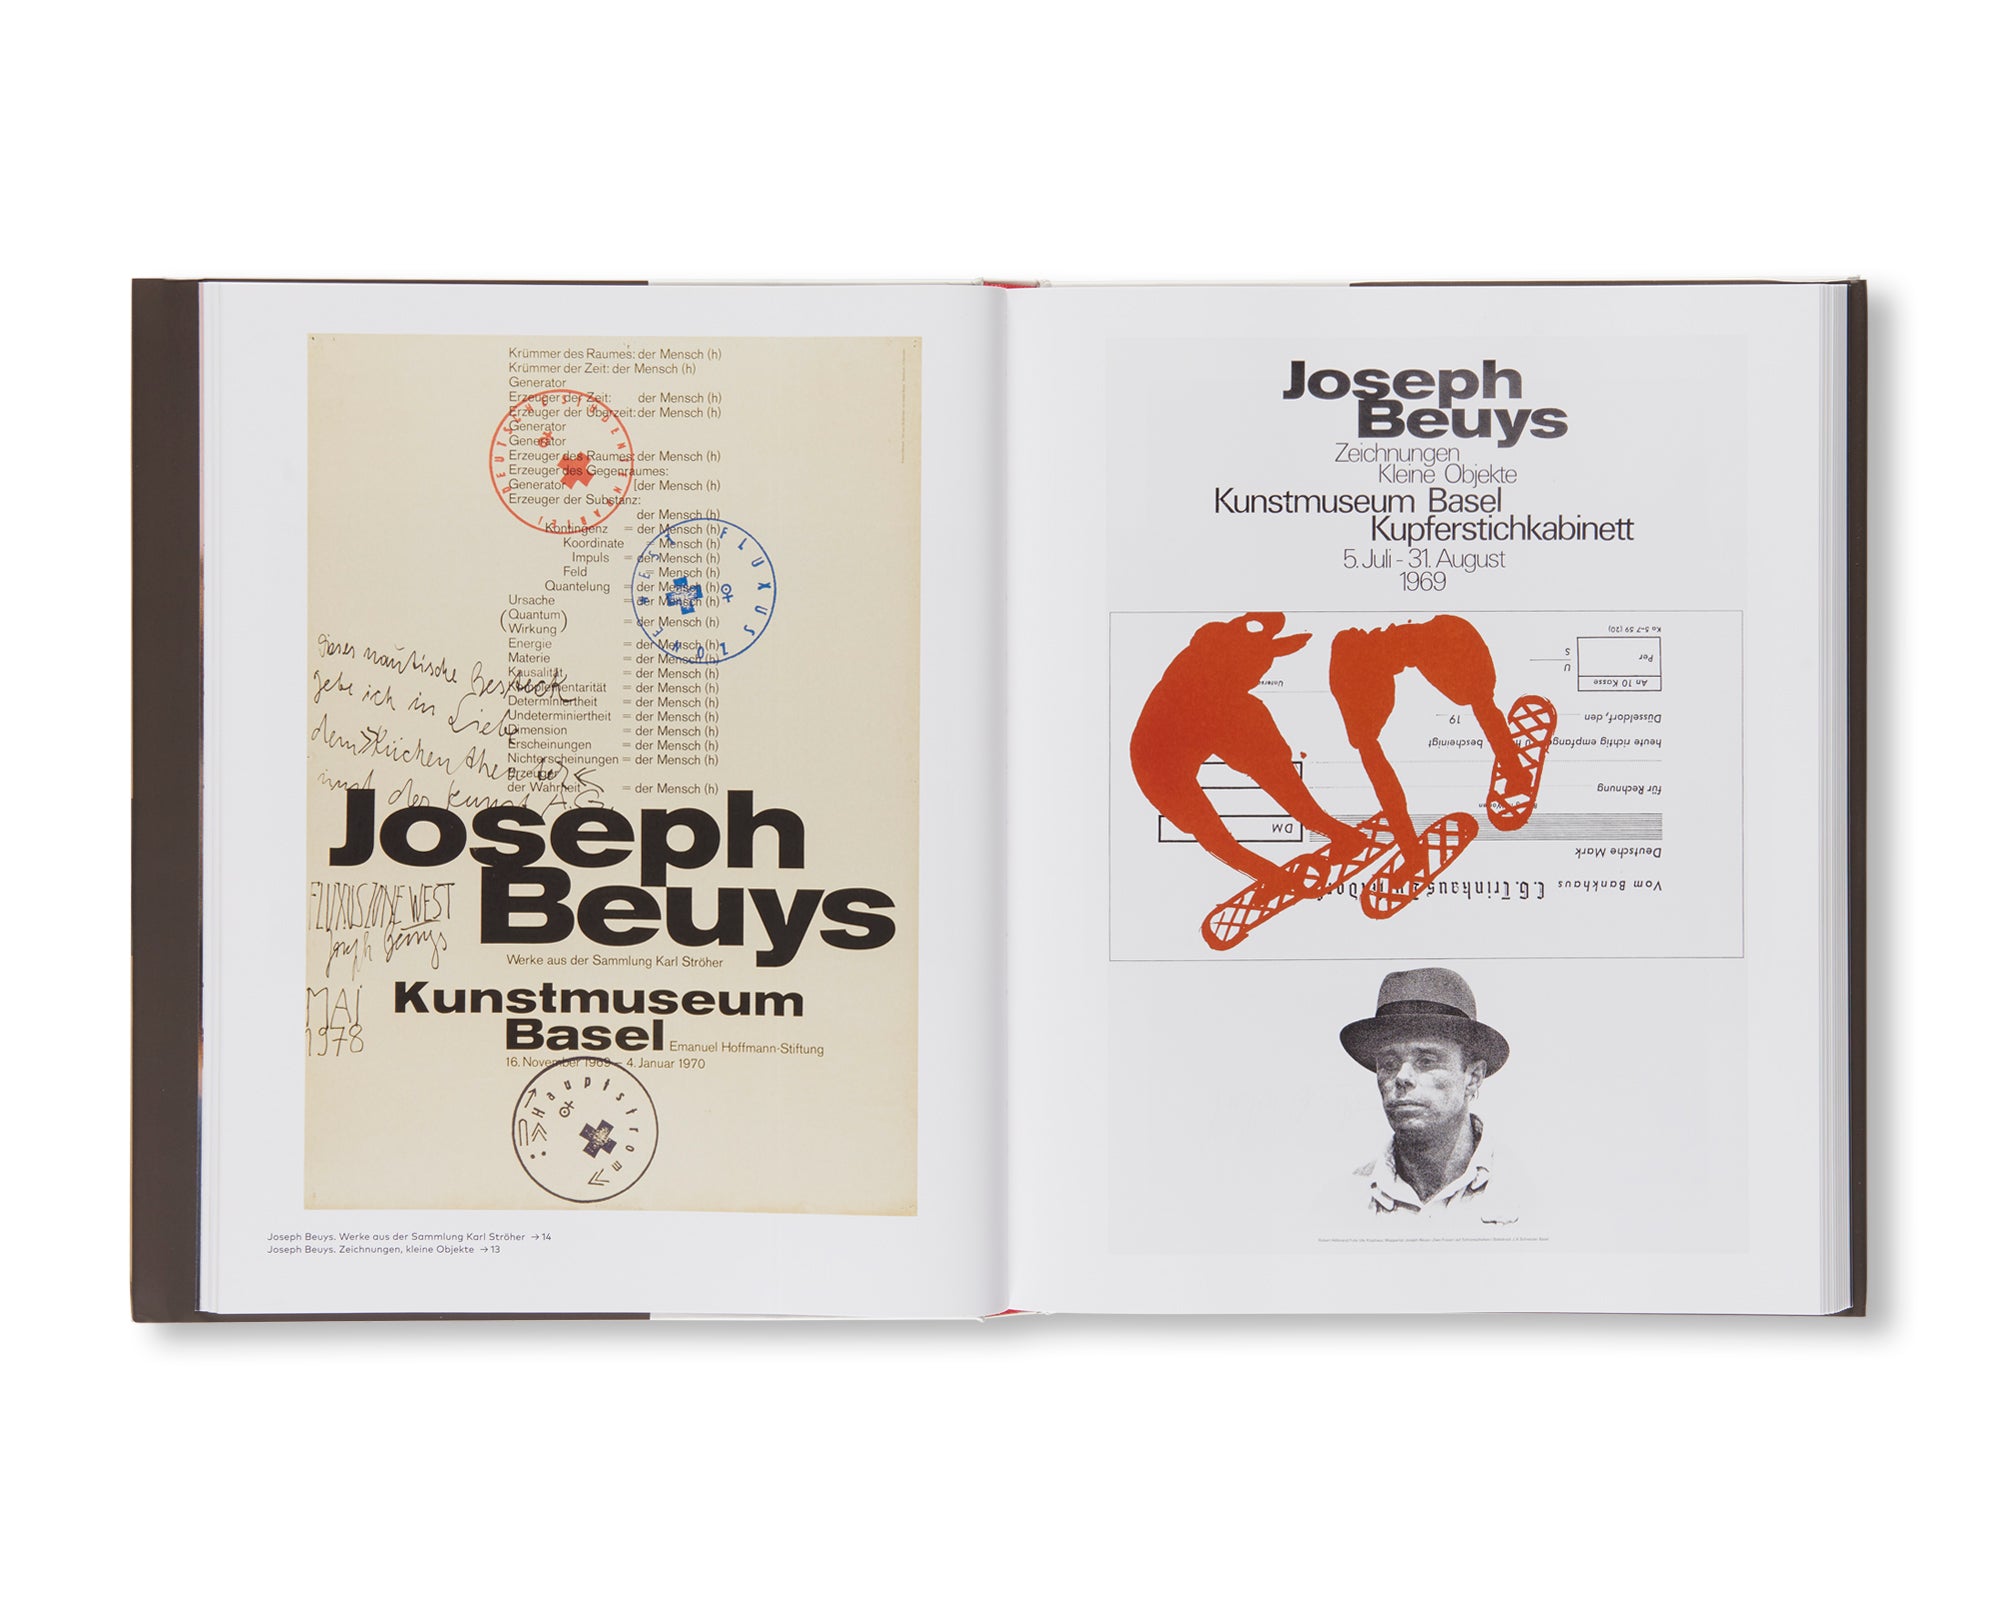 POSTERS by Joseph Beuys